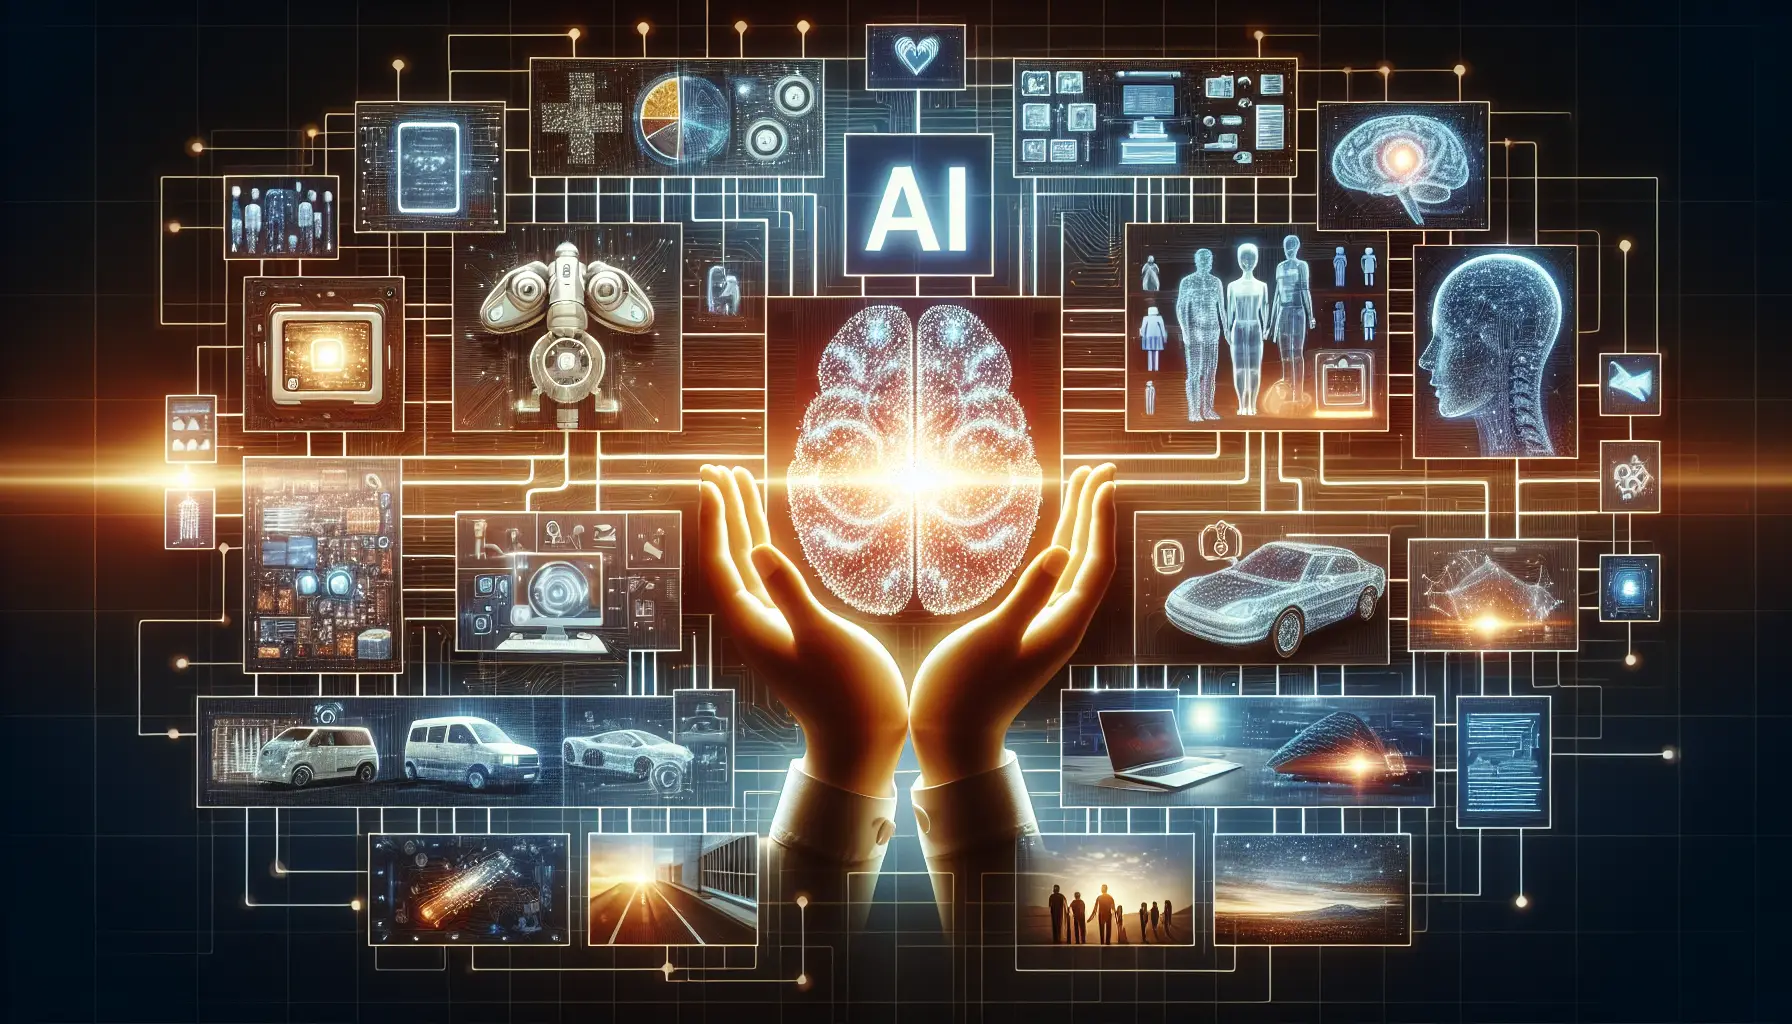 A futuristic depiction of two hands cupping a glowing "what is ai" symbol surrounded by assorted icons representing technology and analytics, set against a dark, digital background.